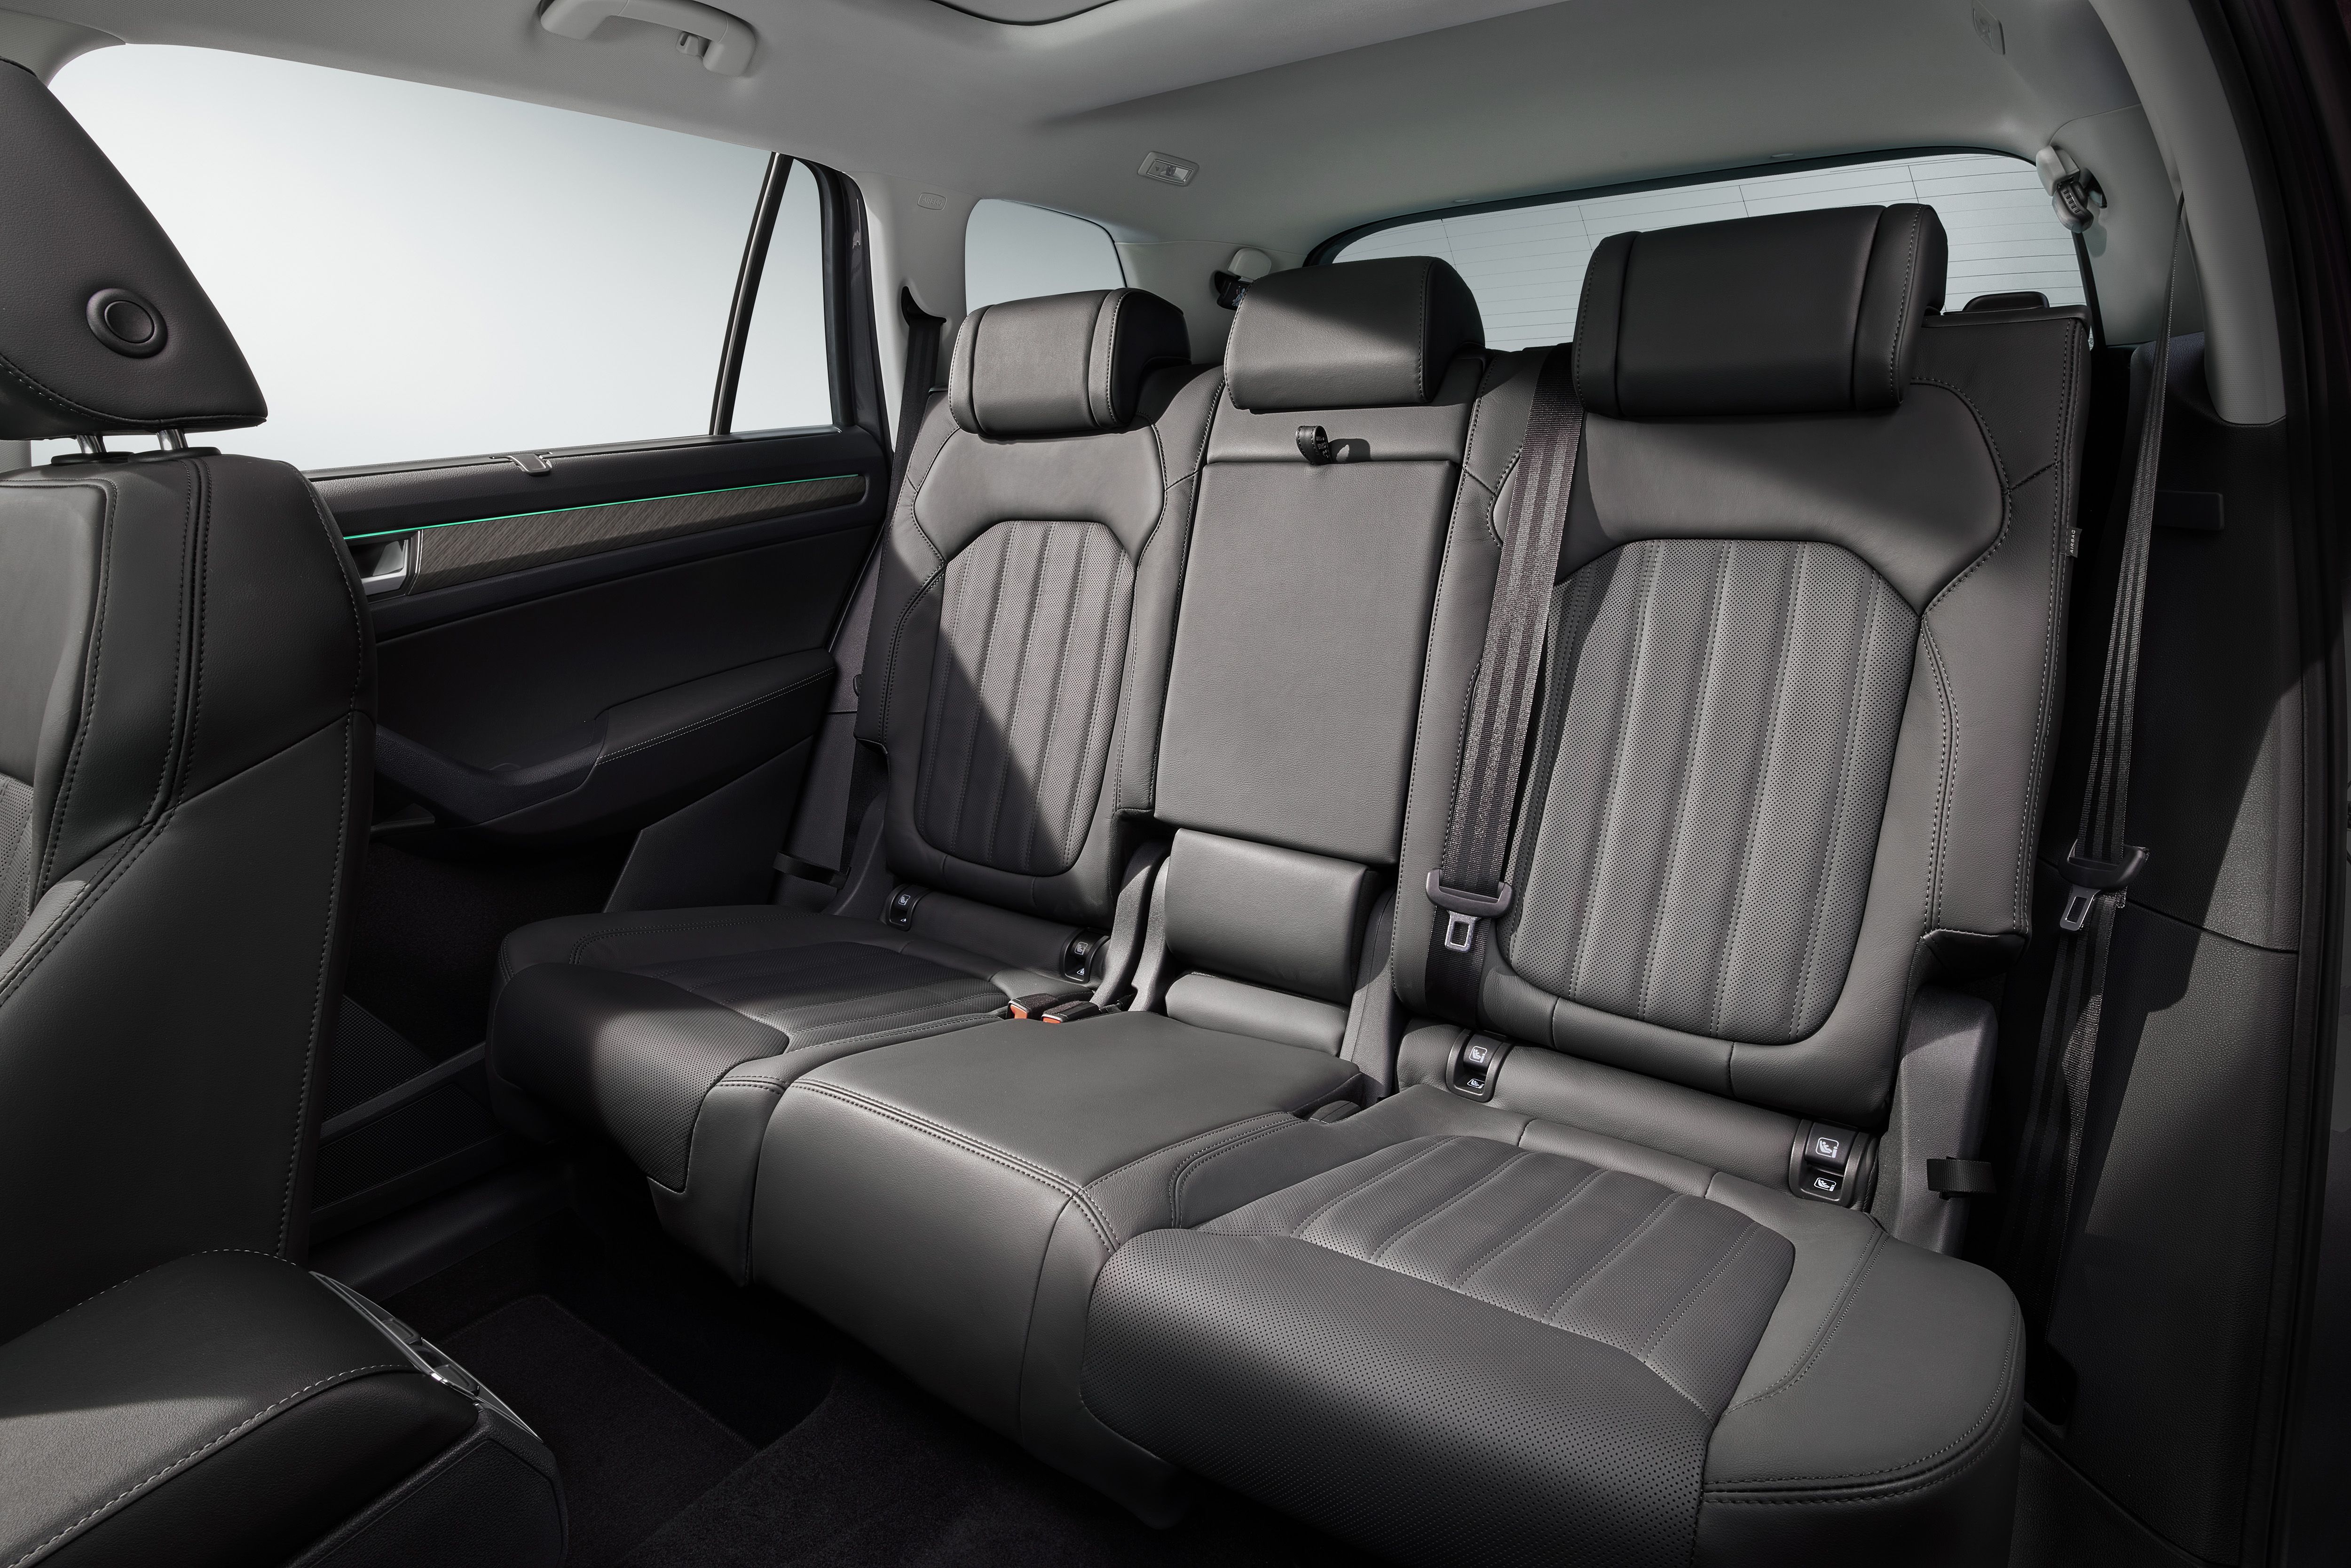 The second row of seats in the Kodiaq